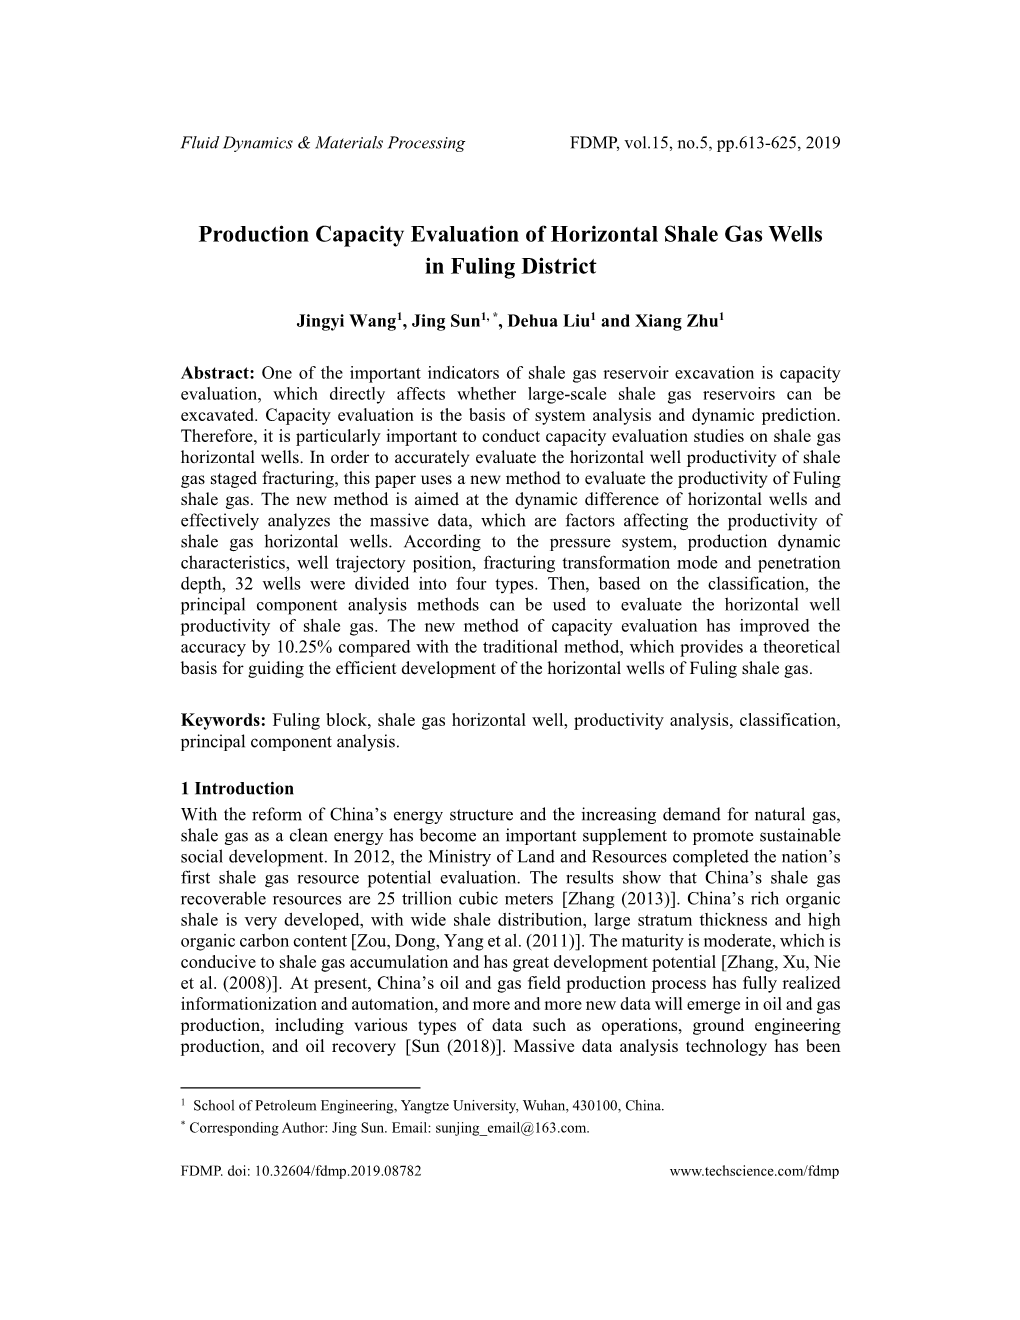 Production Capacity Evaluation of Horizontal Shale Gas Wells in Fuling District